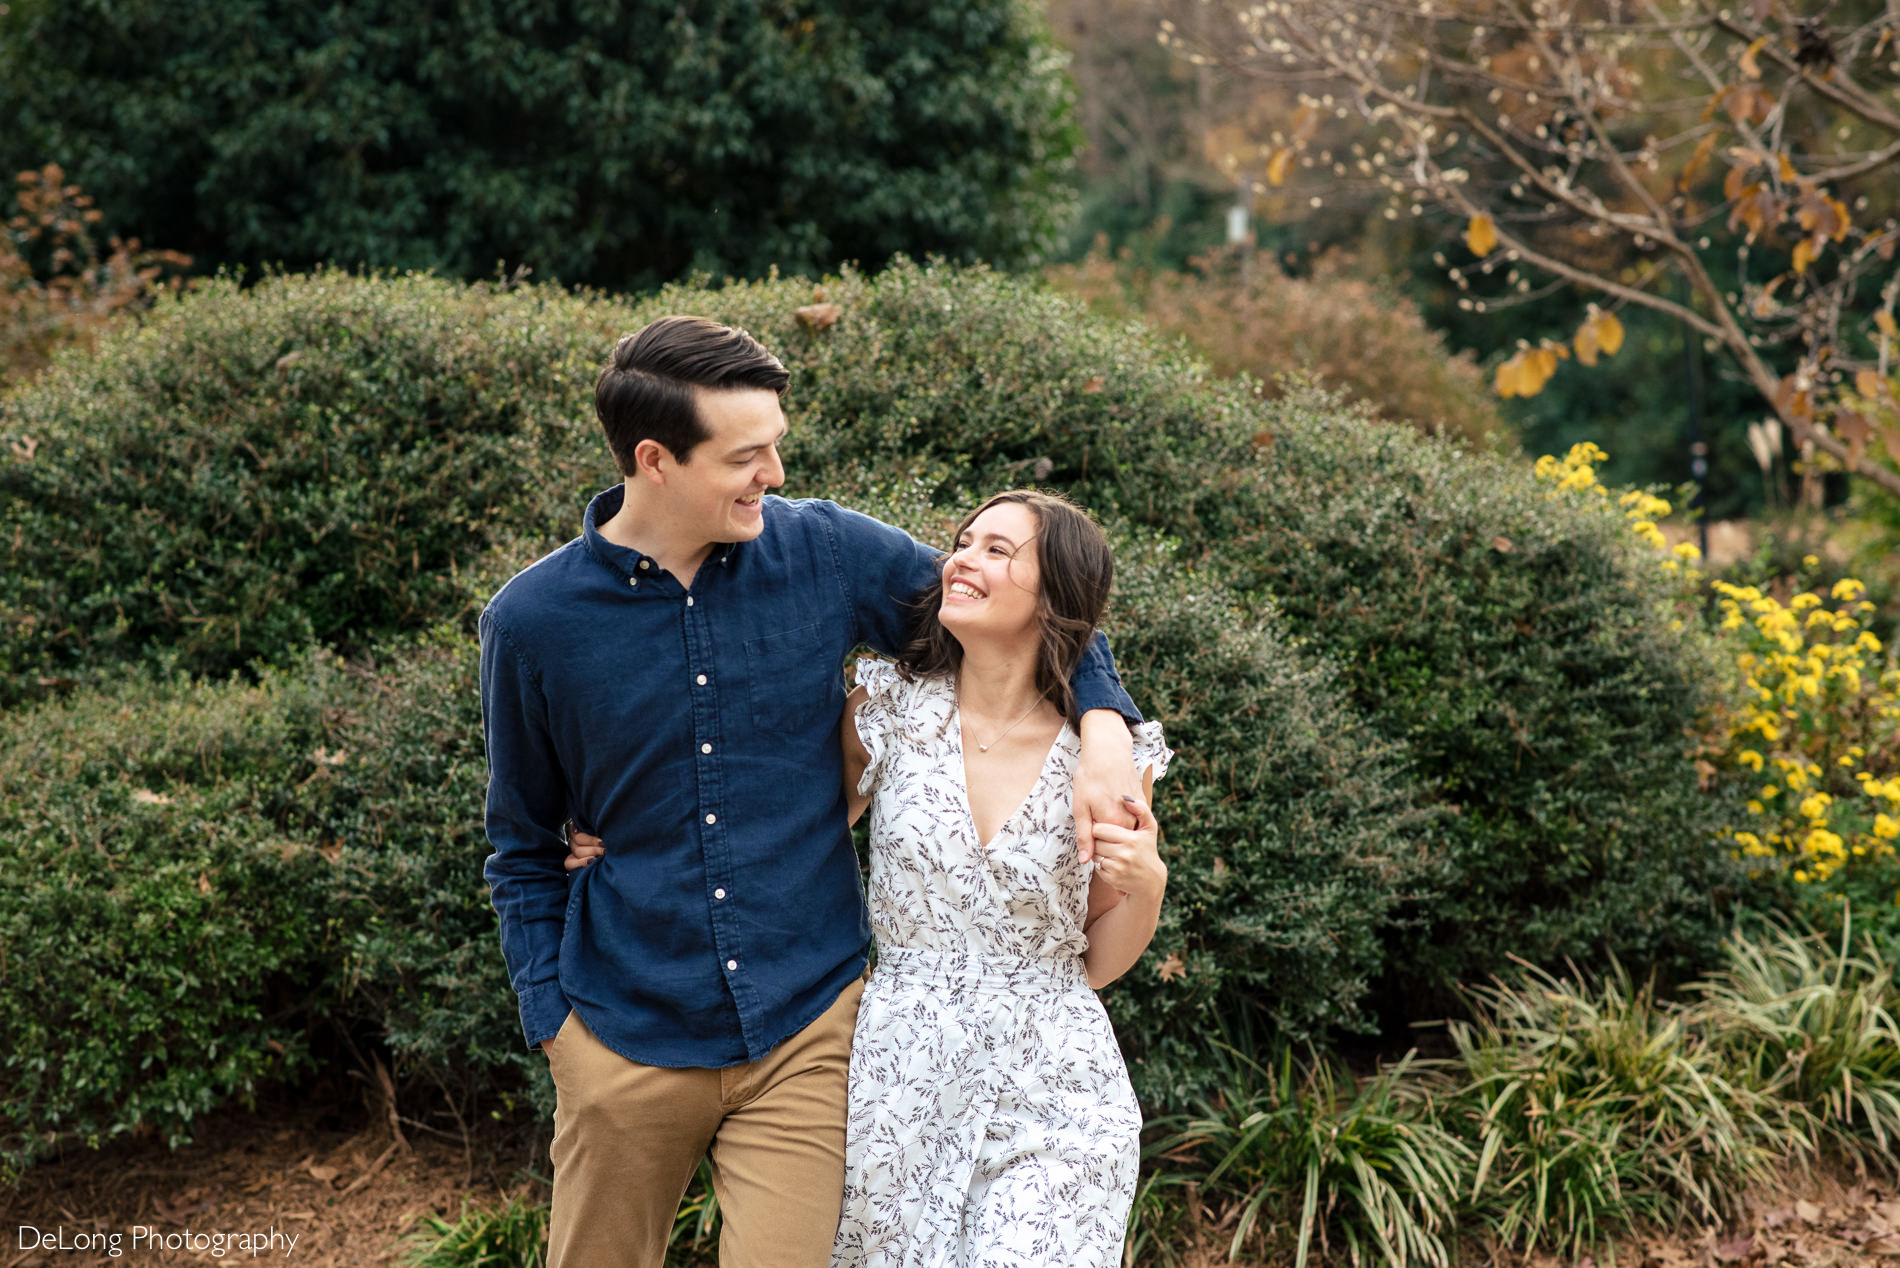 Man with his arm around his fiancee smiling while walking at a Freedom park in Charlotte, NC by Charlotte Wedding Photographers DeLong Photography